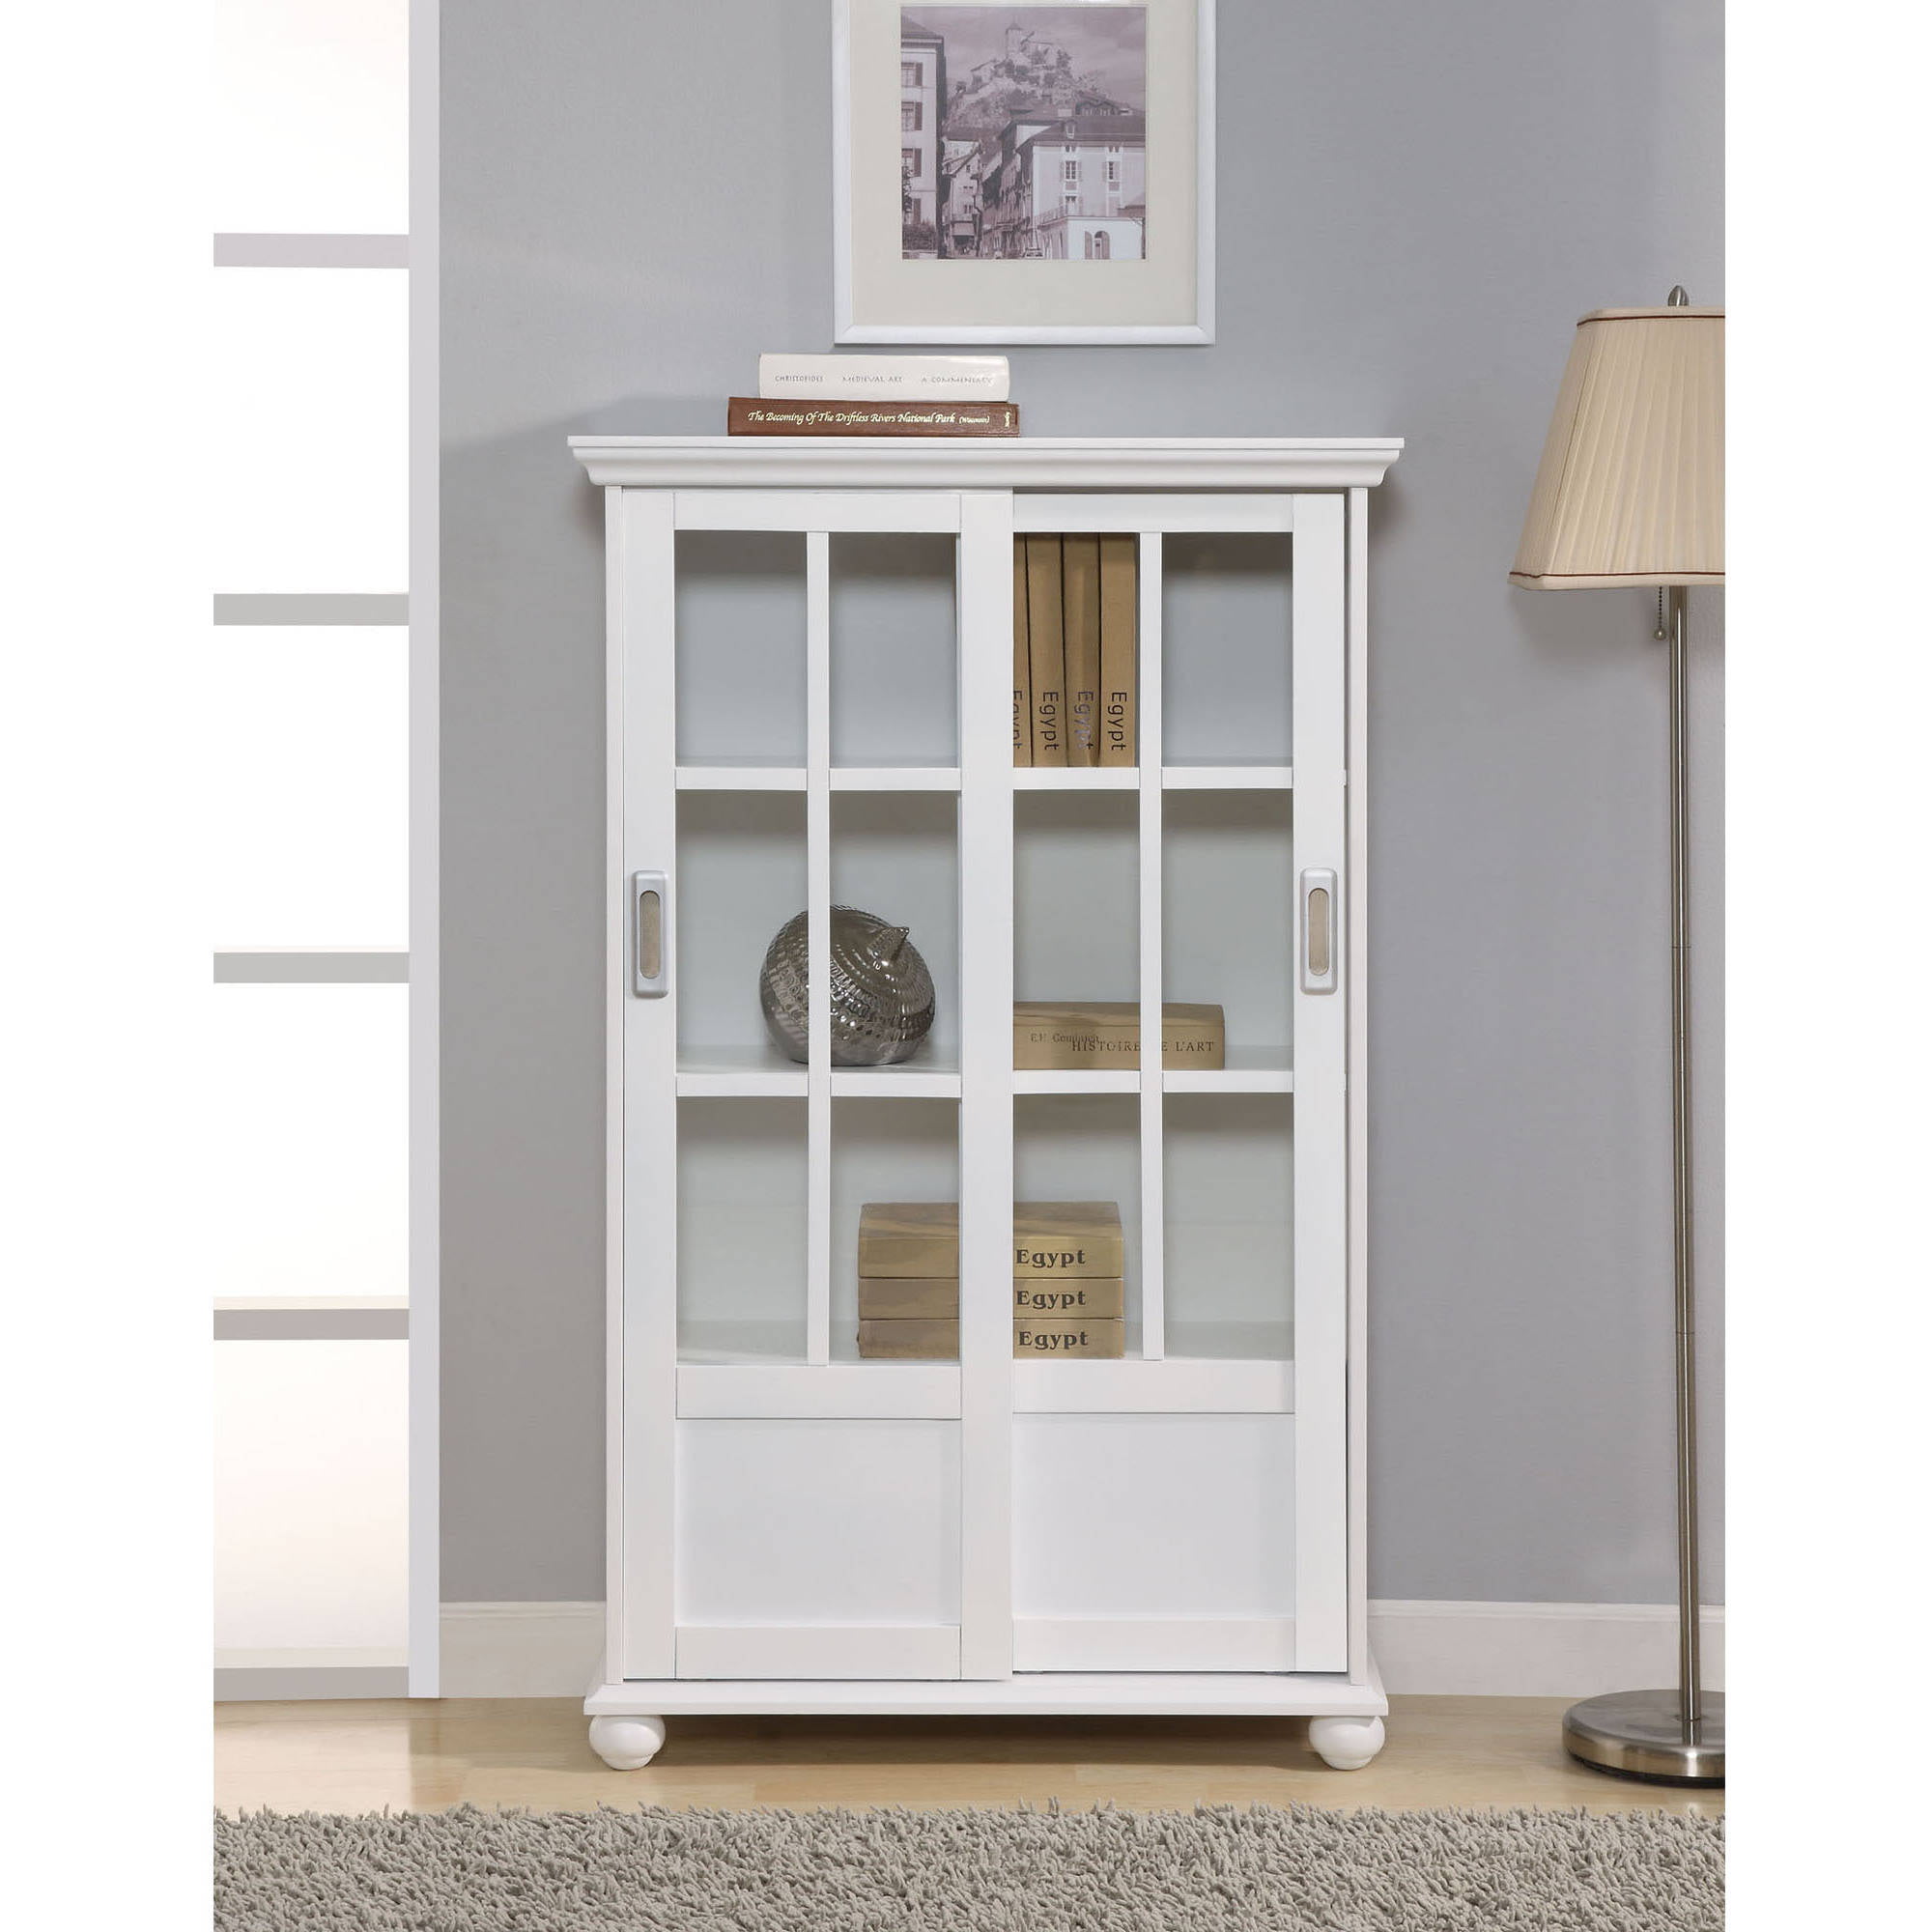 Ameriwood Home Aaron Lane Bookcase With, Doors For Bookcase